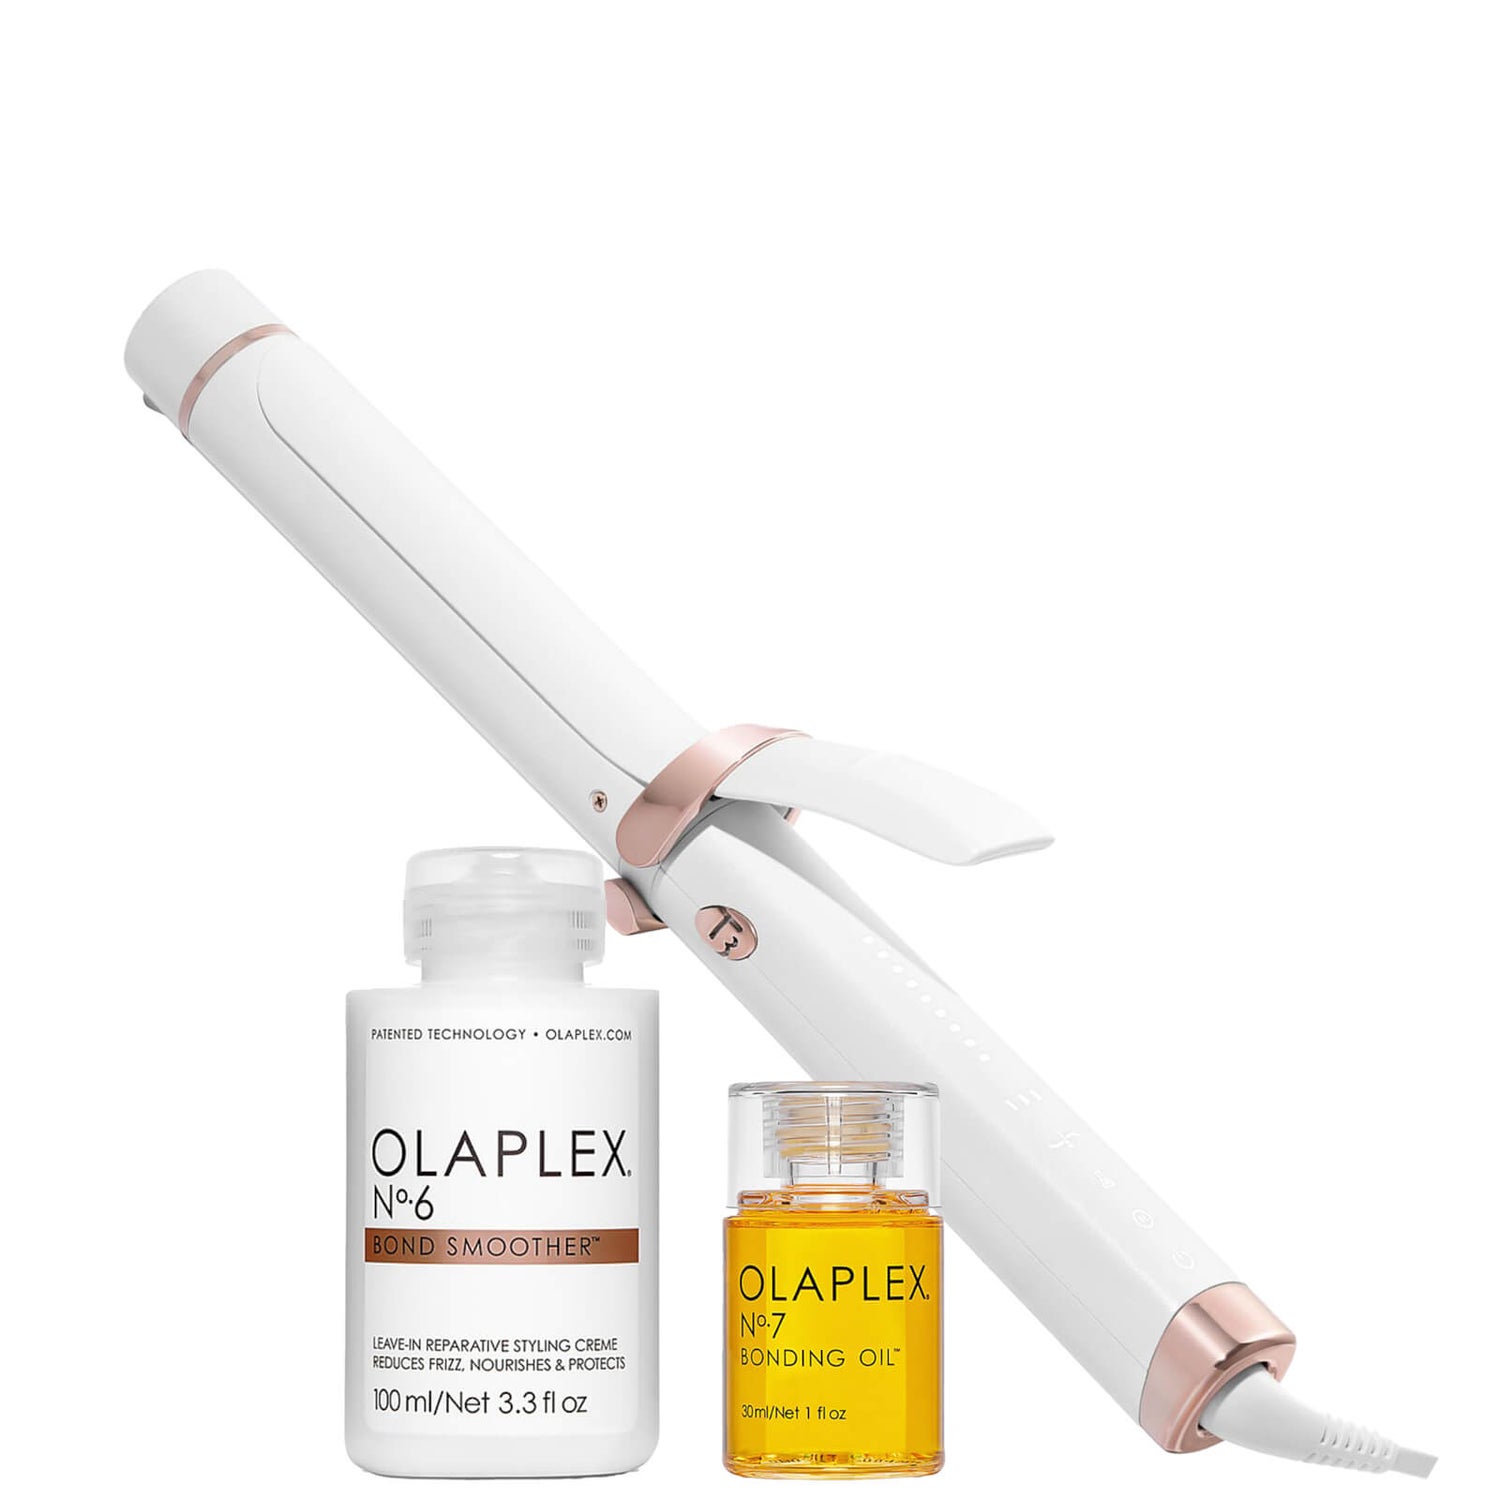 SkinStore Exclusive T3 Curl ID Curling Iron and Olaplex No 6 & 7 Kit